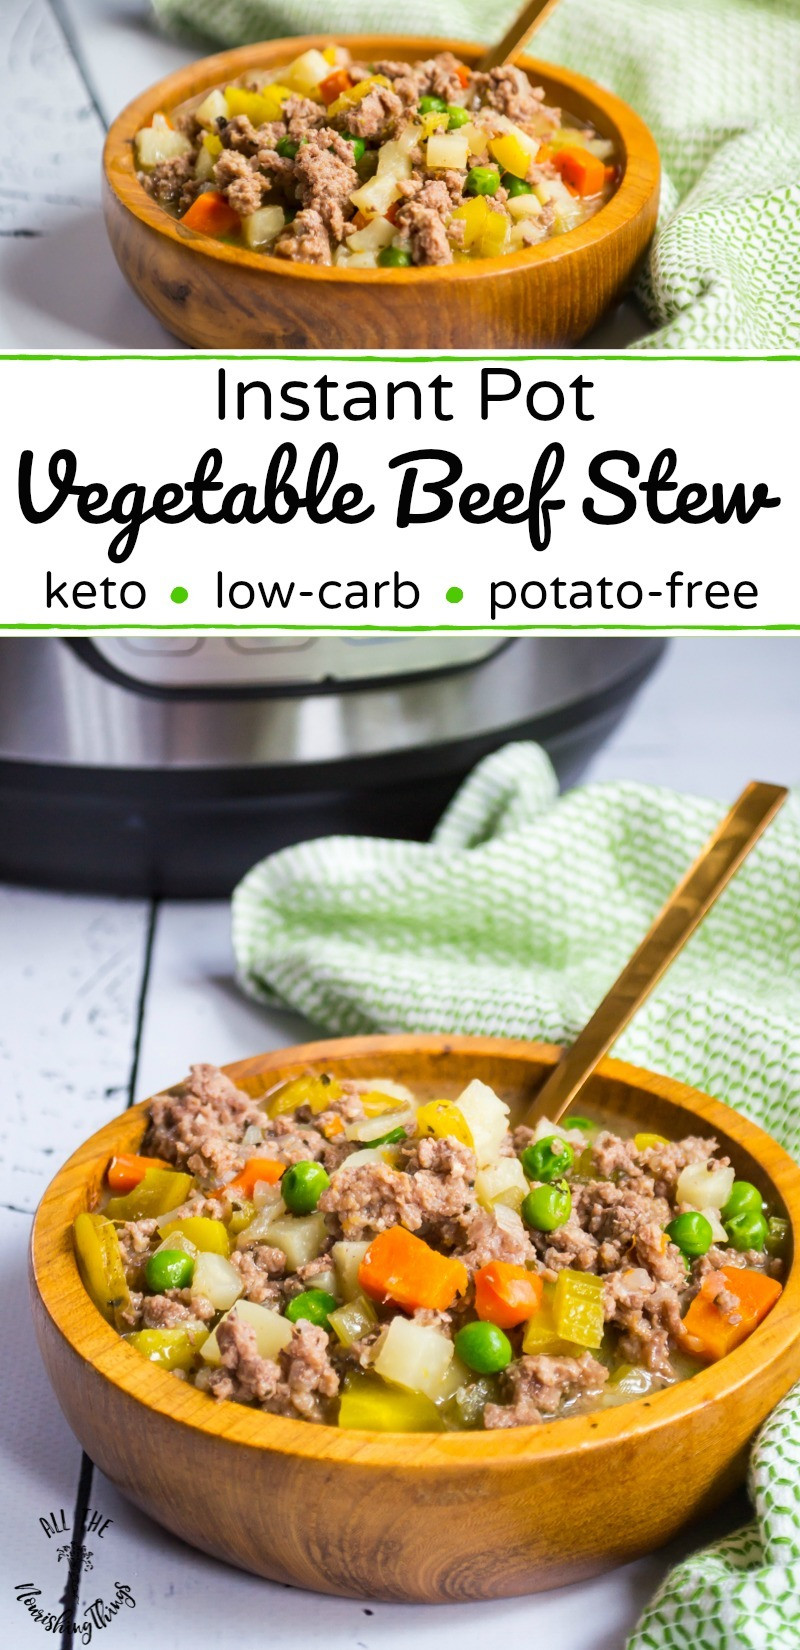 Beef Stew Meat Recipes Instant Pot Keto
 Instant Pot Ve able Beef Stew keto Whole30 potato free